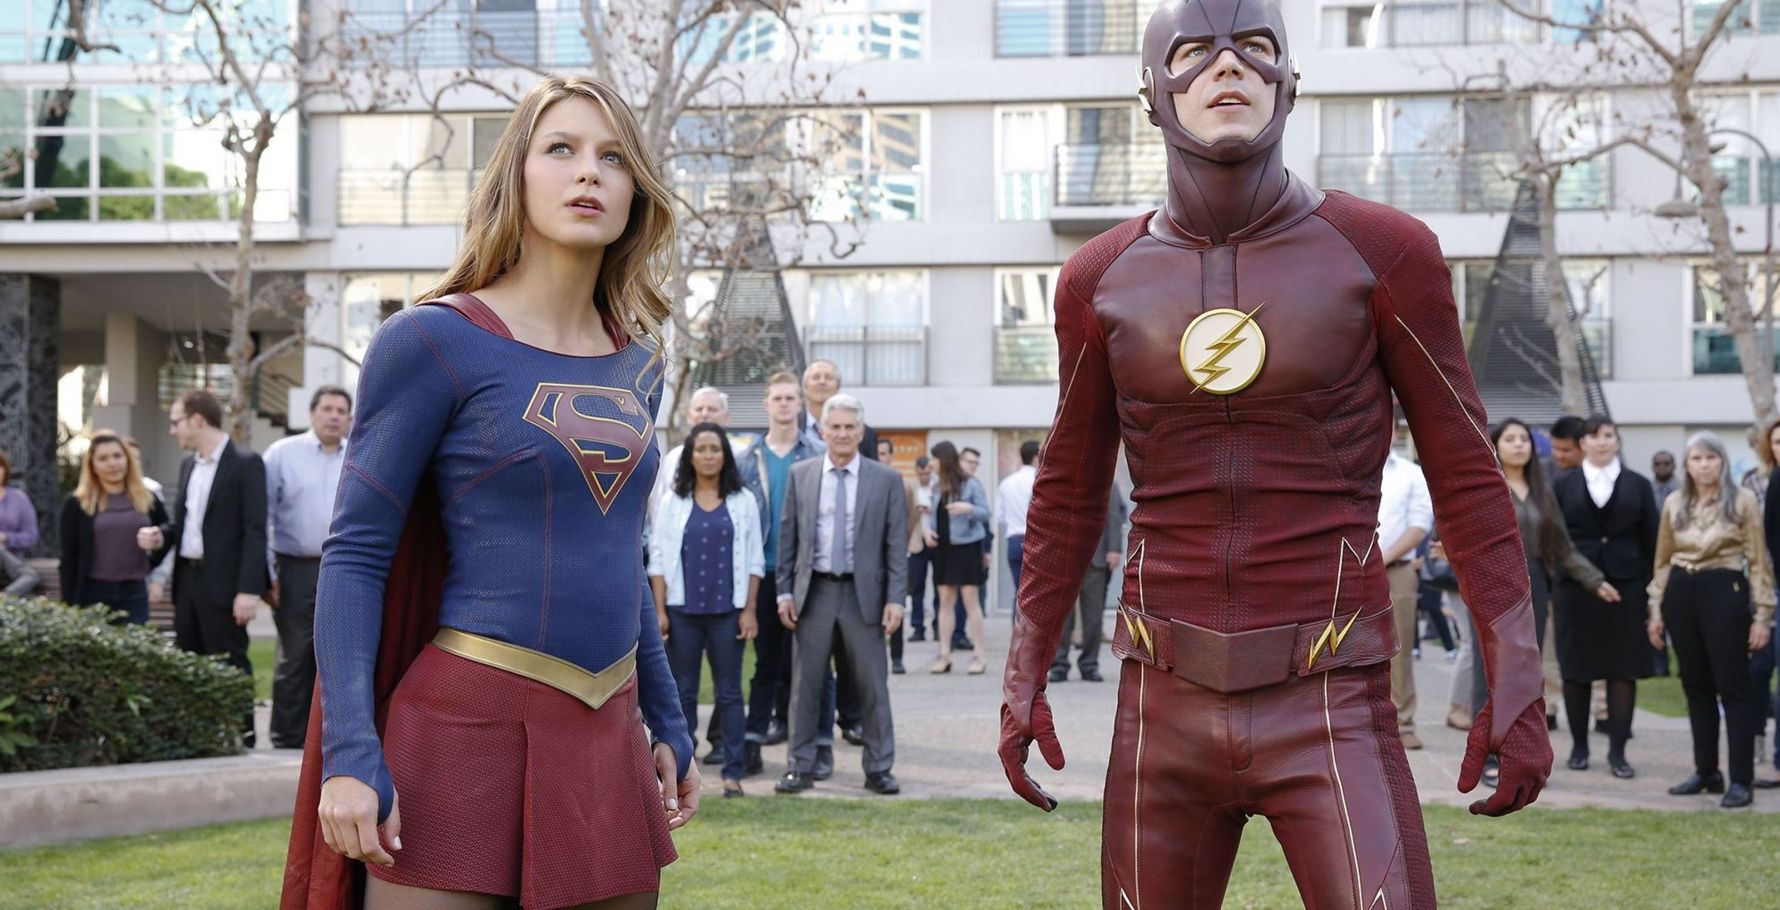 Supergirl and Flash in World's Finest